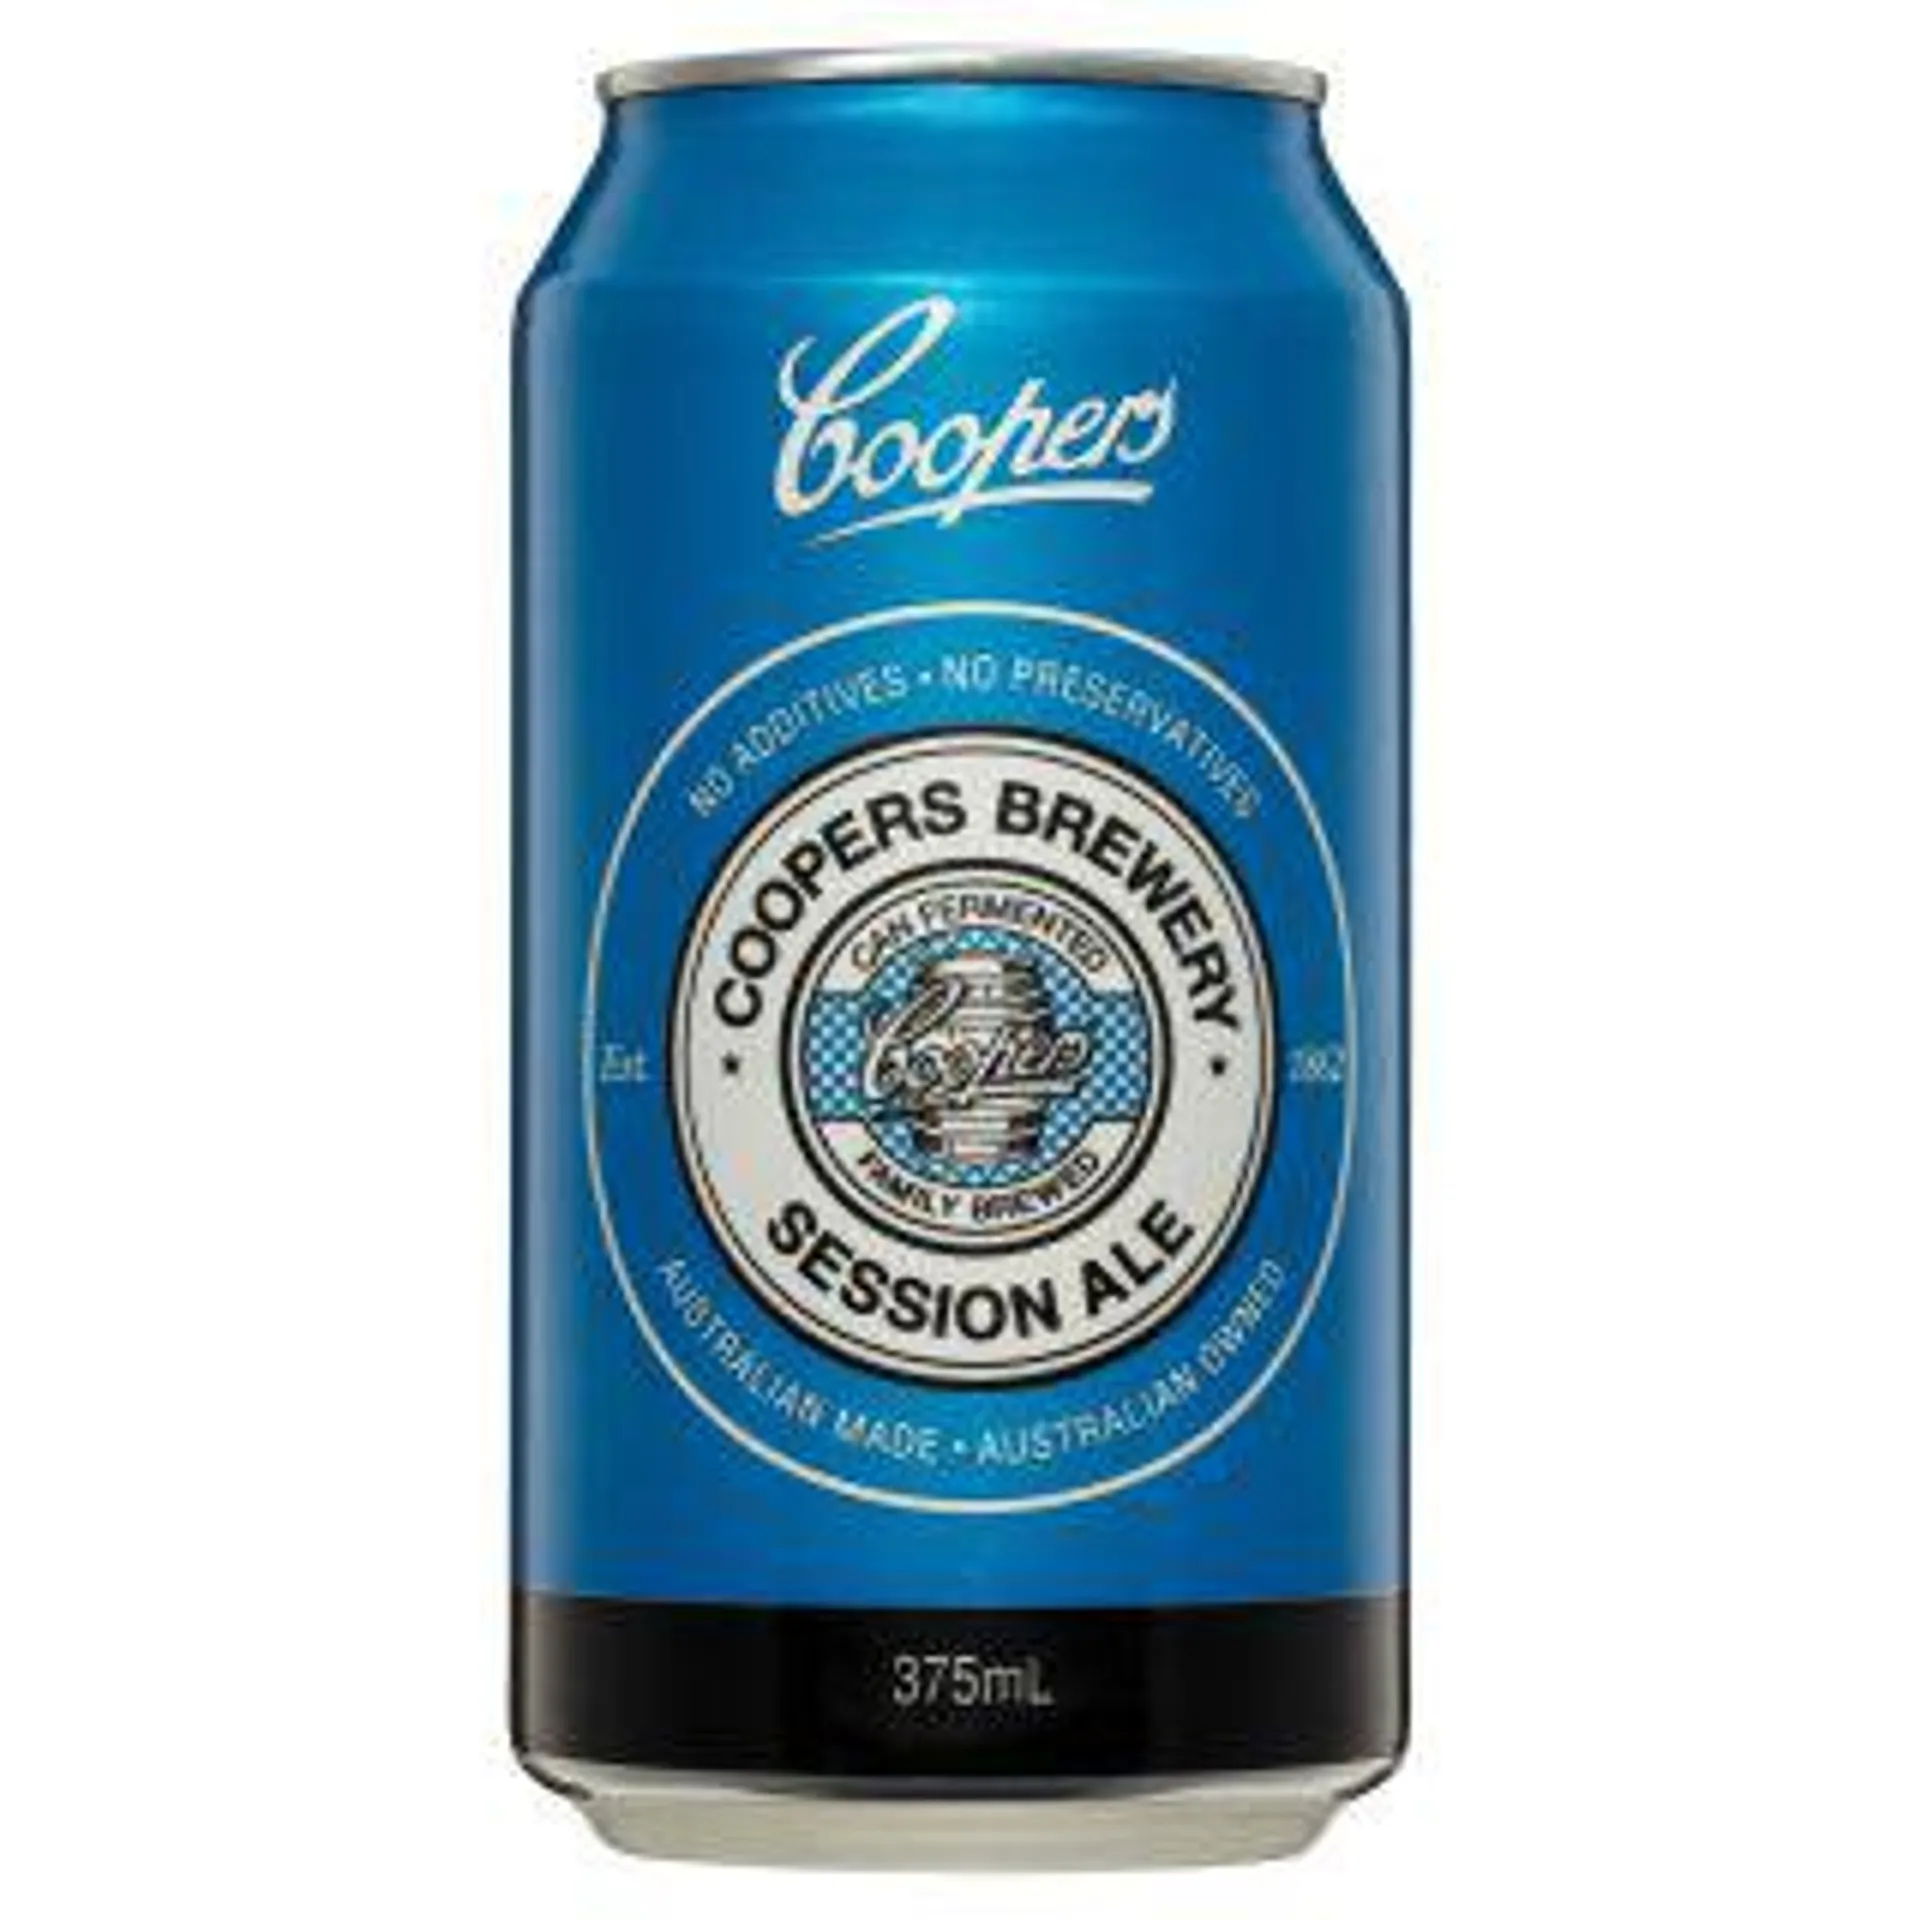 Coopers Brewery Session Ale 24 x 375mL Cans